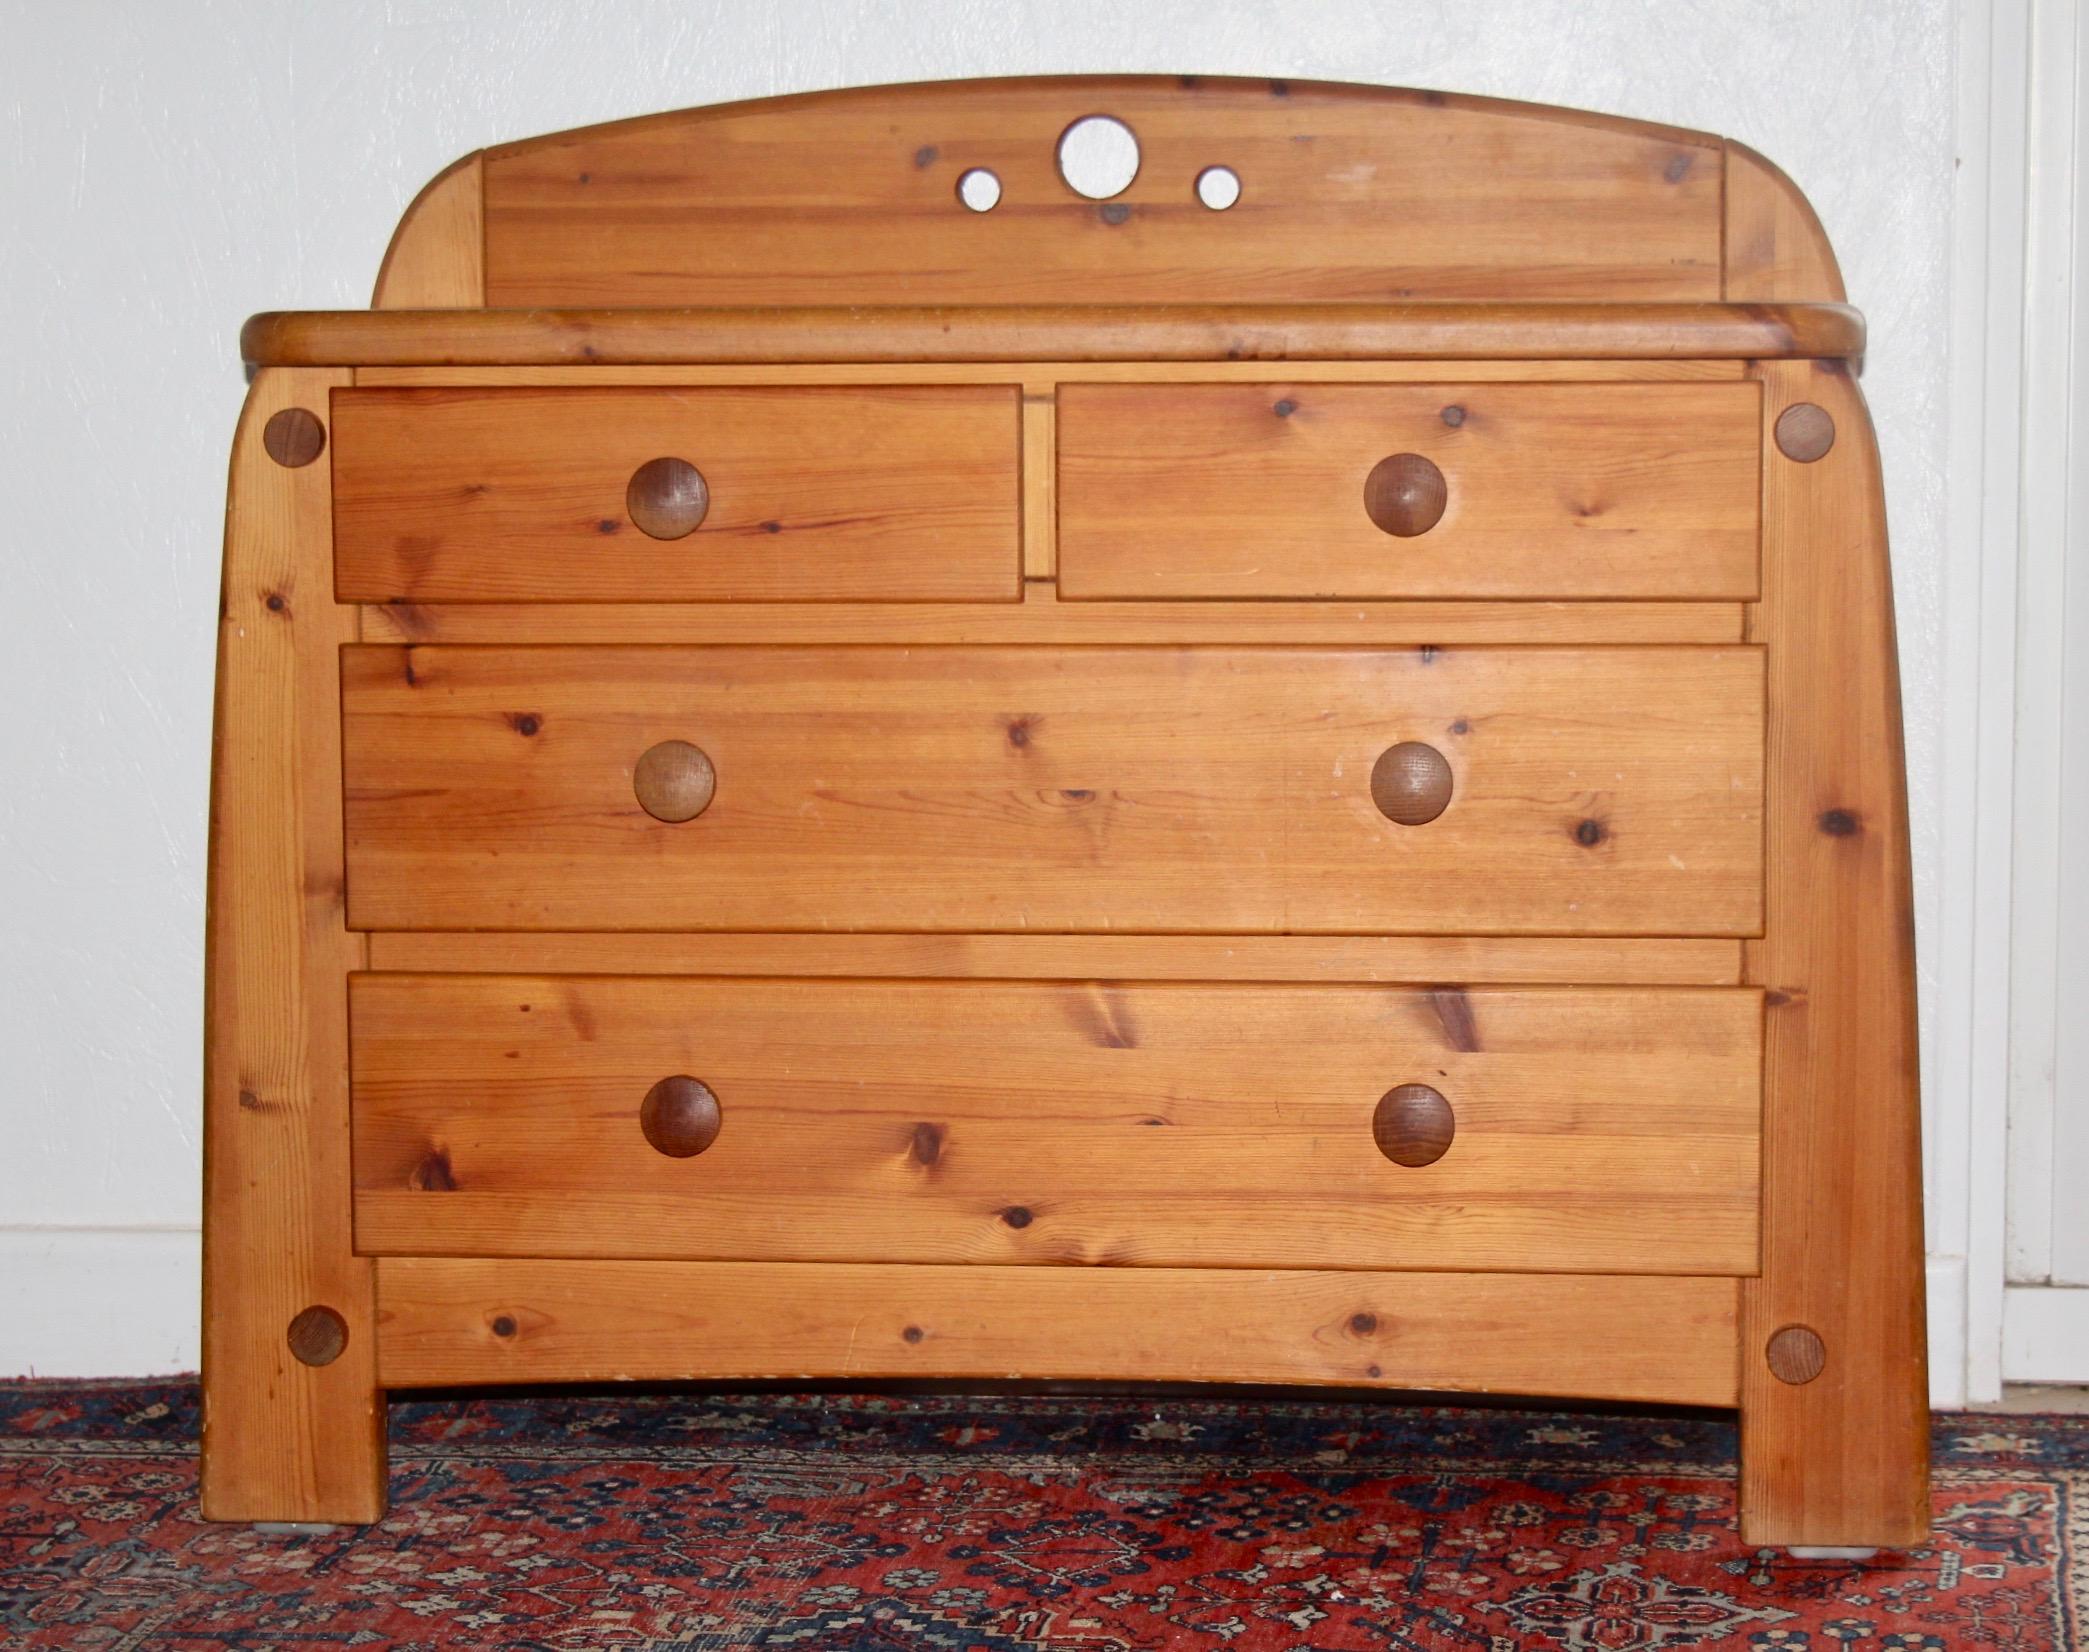 solid pine chest by Wasa , the name of a very successful furniture series in the 70s, today stands for the whole company - it became a trademark for perfectly natural, carefully crafted solid wood furniture of great formal ease with classic or